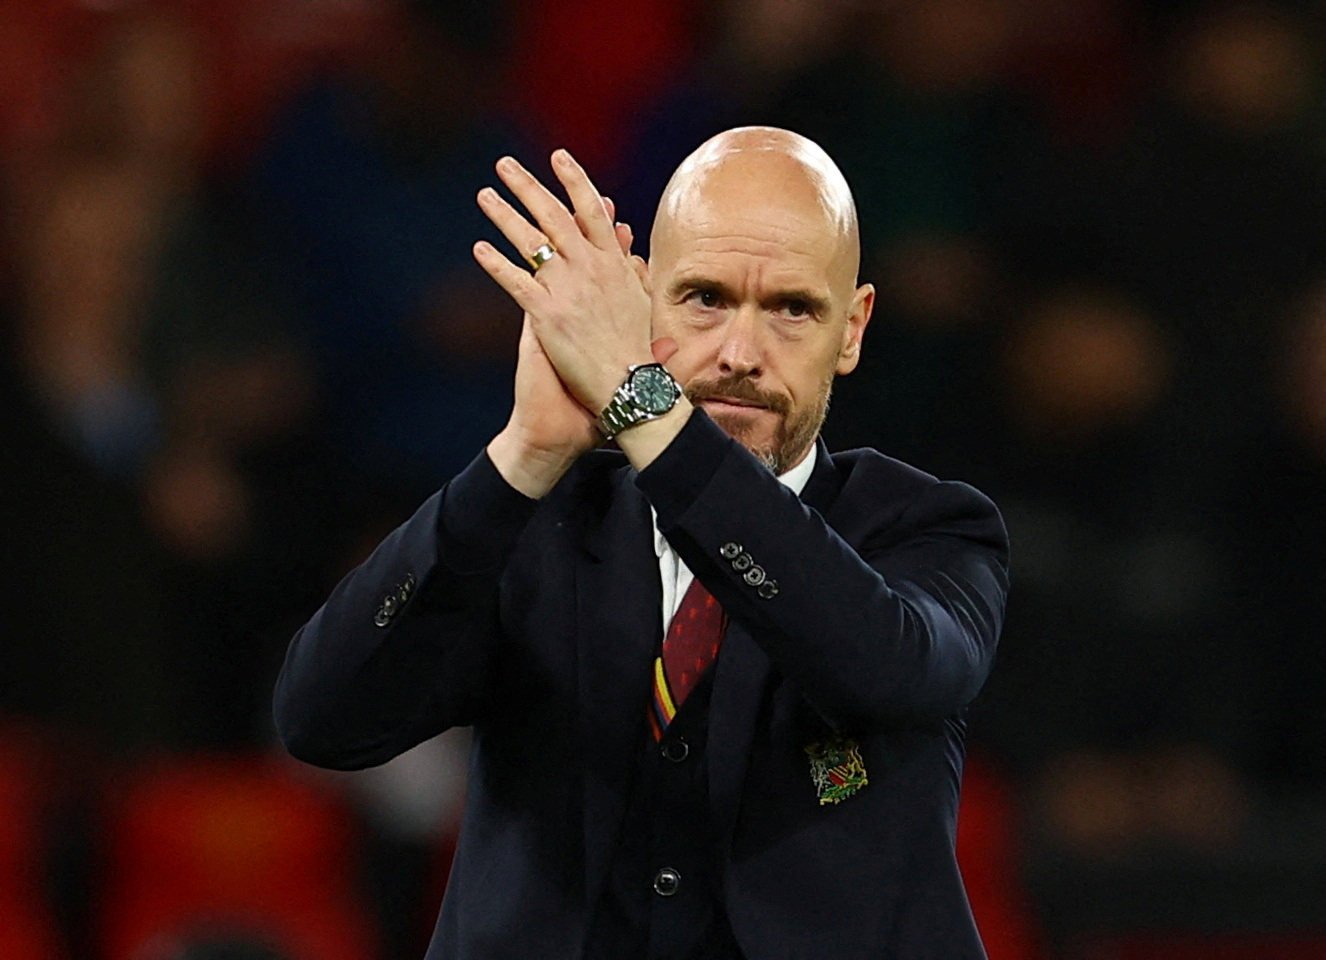 Erik ten Hag will be sacked from his role as Manchester United manager, reports in the UK press suggest. Photo: Reuters